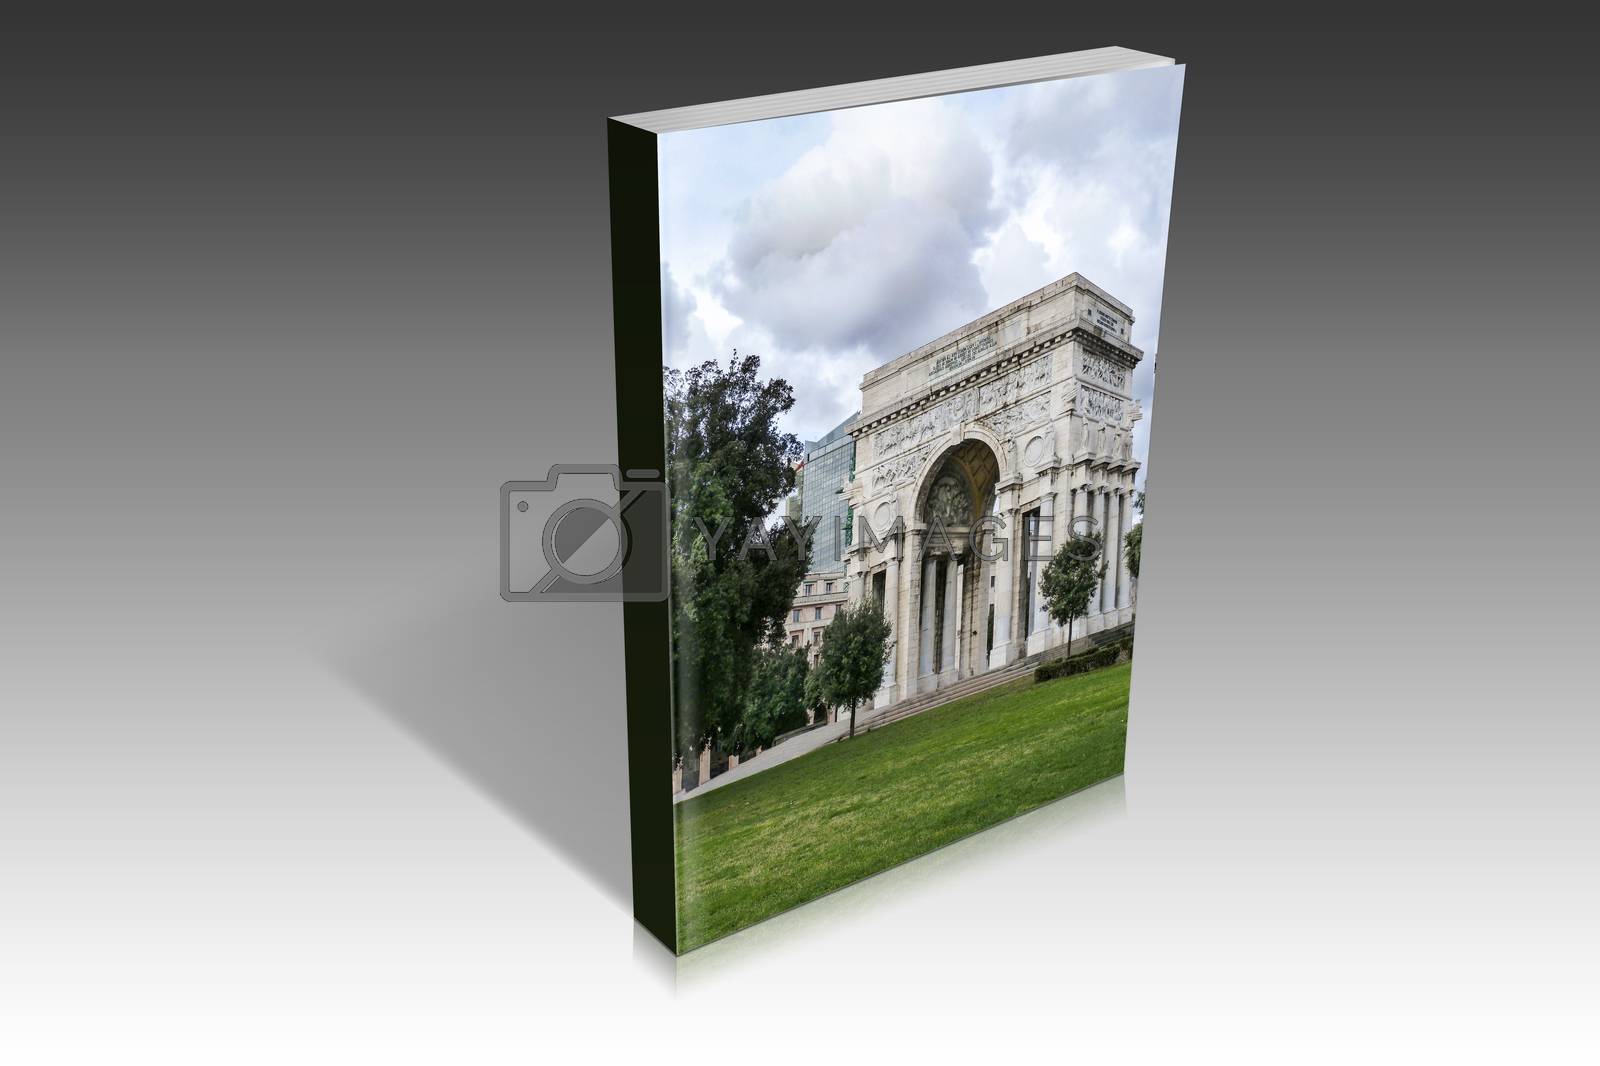 Royalty free image of book illustration of the triumphal arch at Genova by carla720